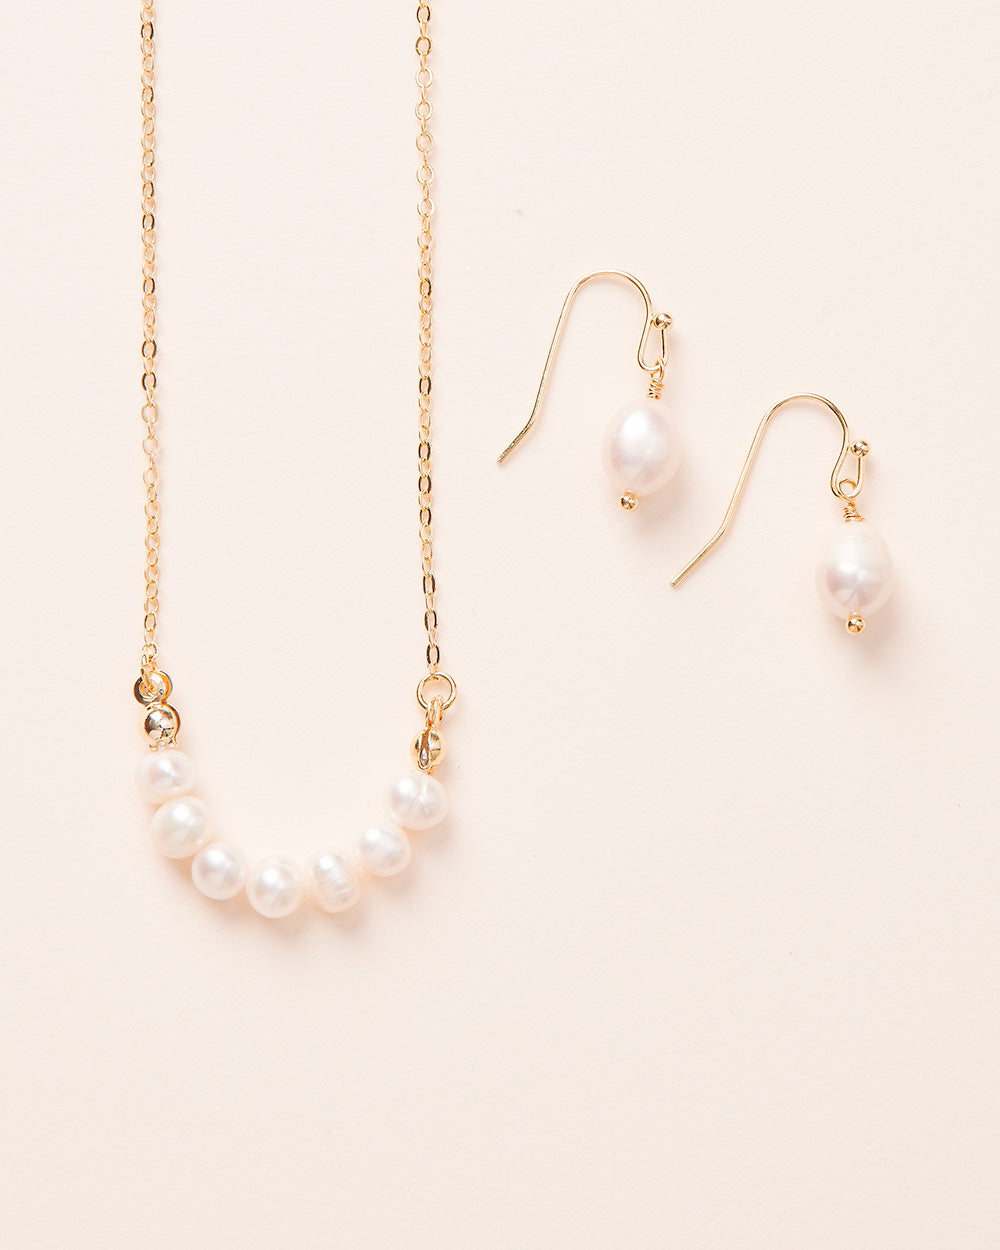 Gold Bridesmaid Jewelry with Pearls